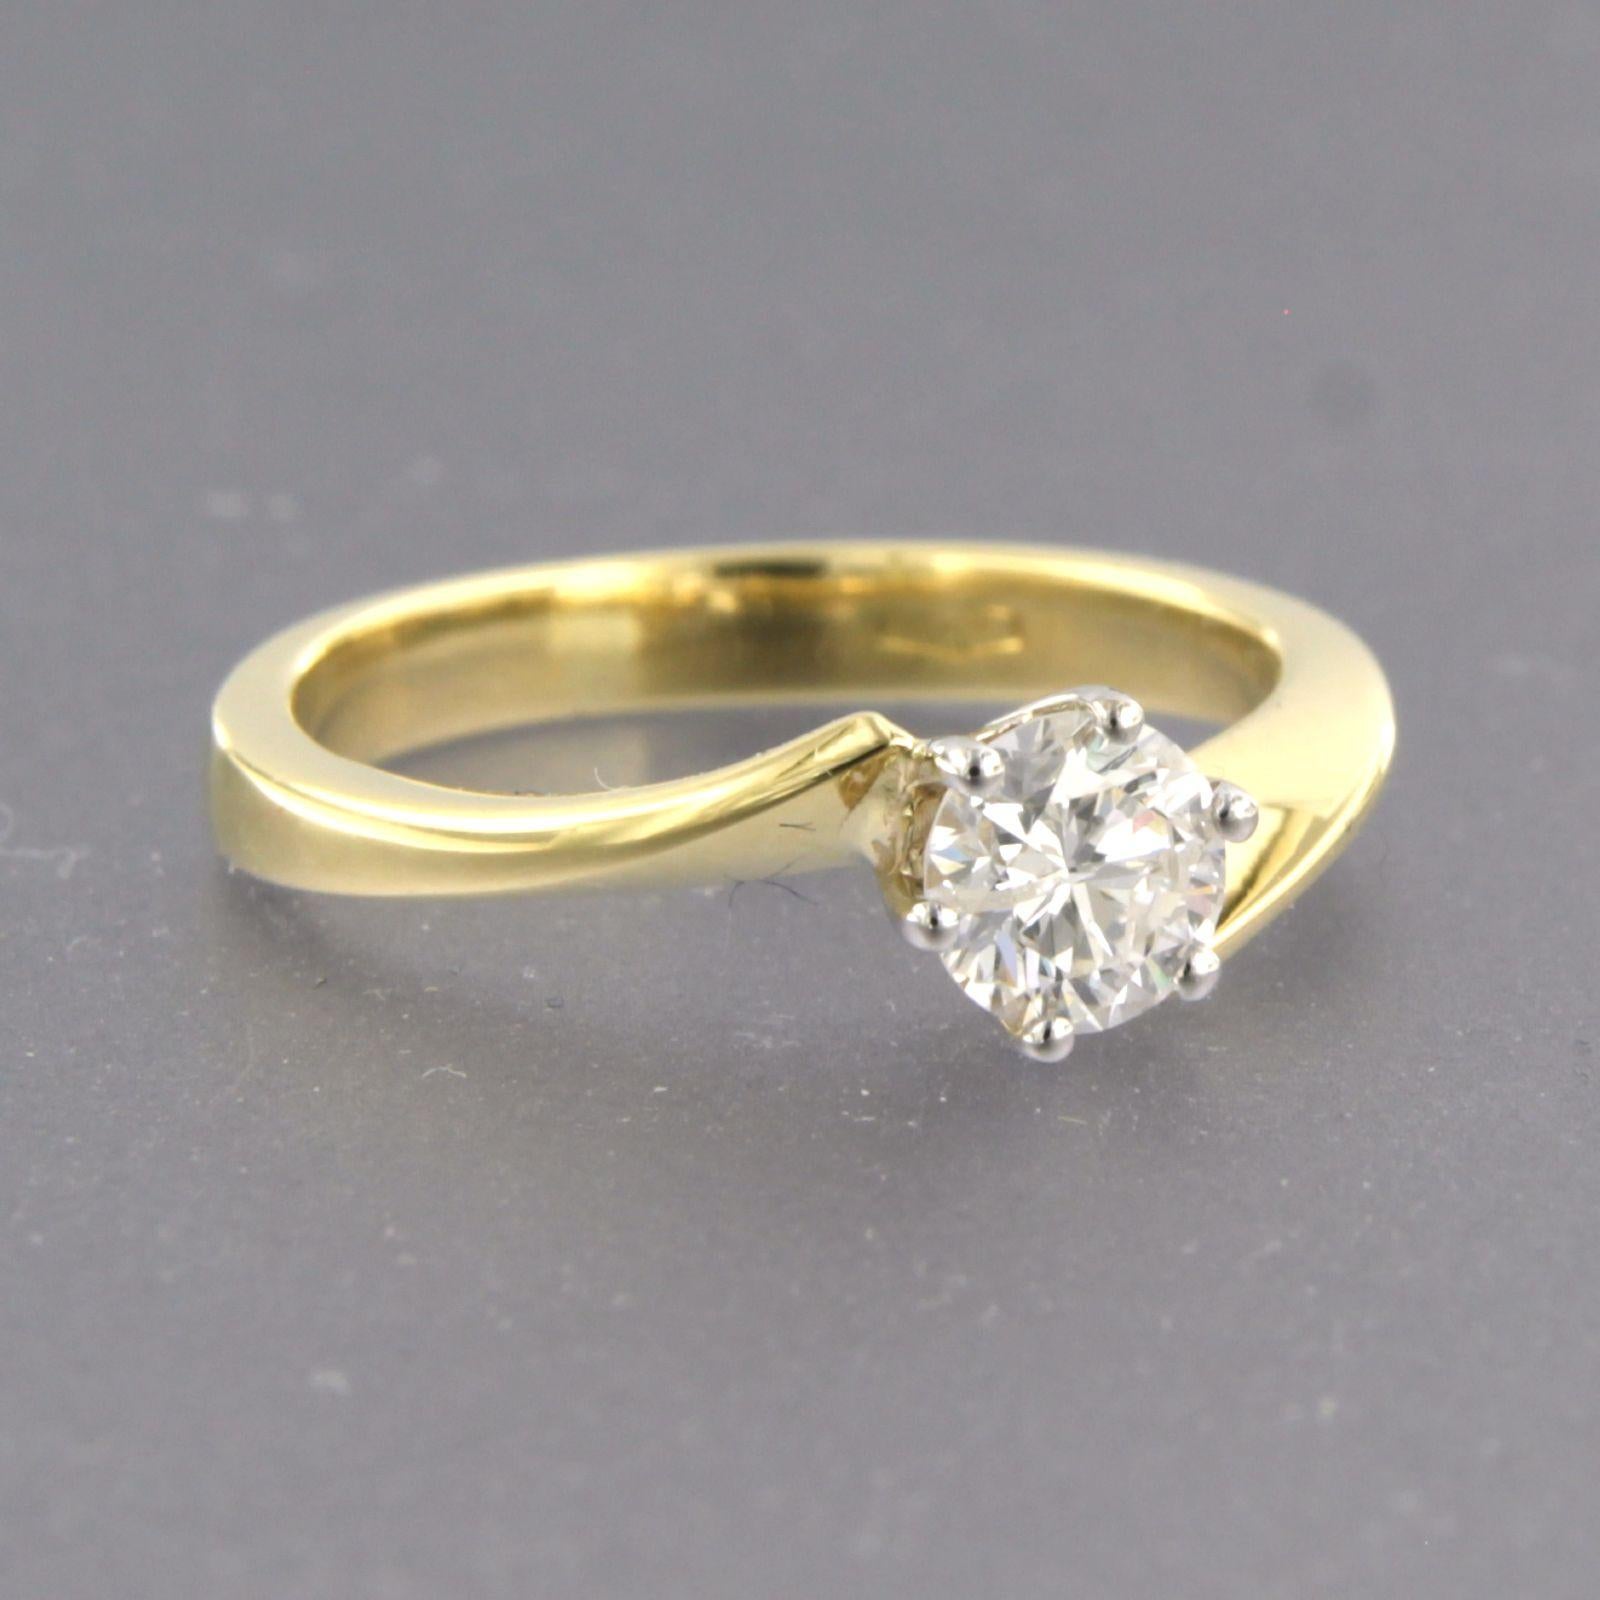 18k bicolour gold solitaire ring set with brilliant cut diamonds up to . 0.50ct - F/G - P1 - ring size U.S. 5.25 - EU. 16(50)

detailed description:

the top of the ring is 5.9 mm wide by 5.5 mm high

ring size US 5.25 - EU. 16(50), ring can be